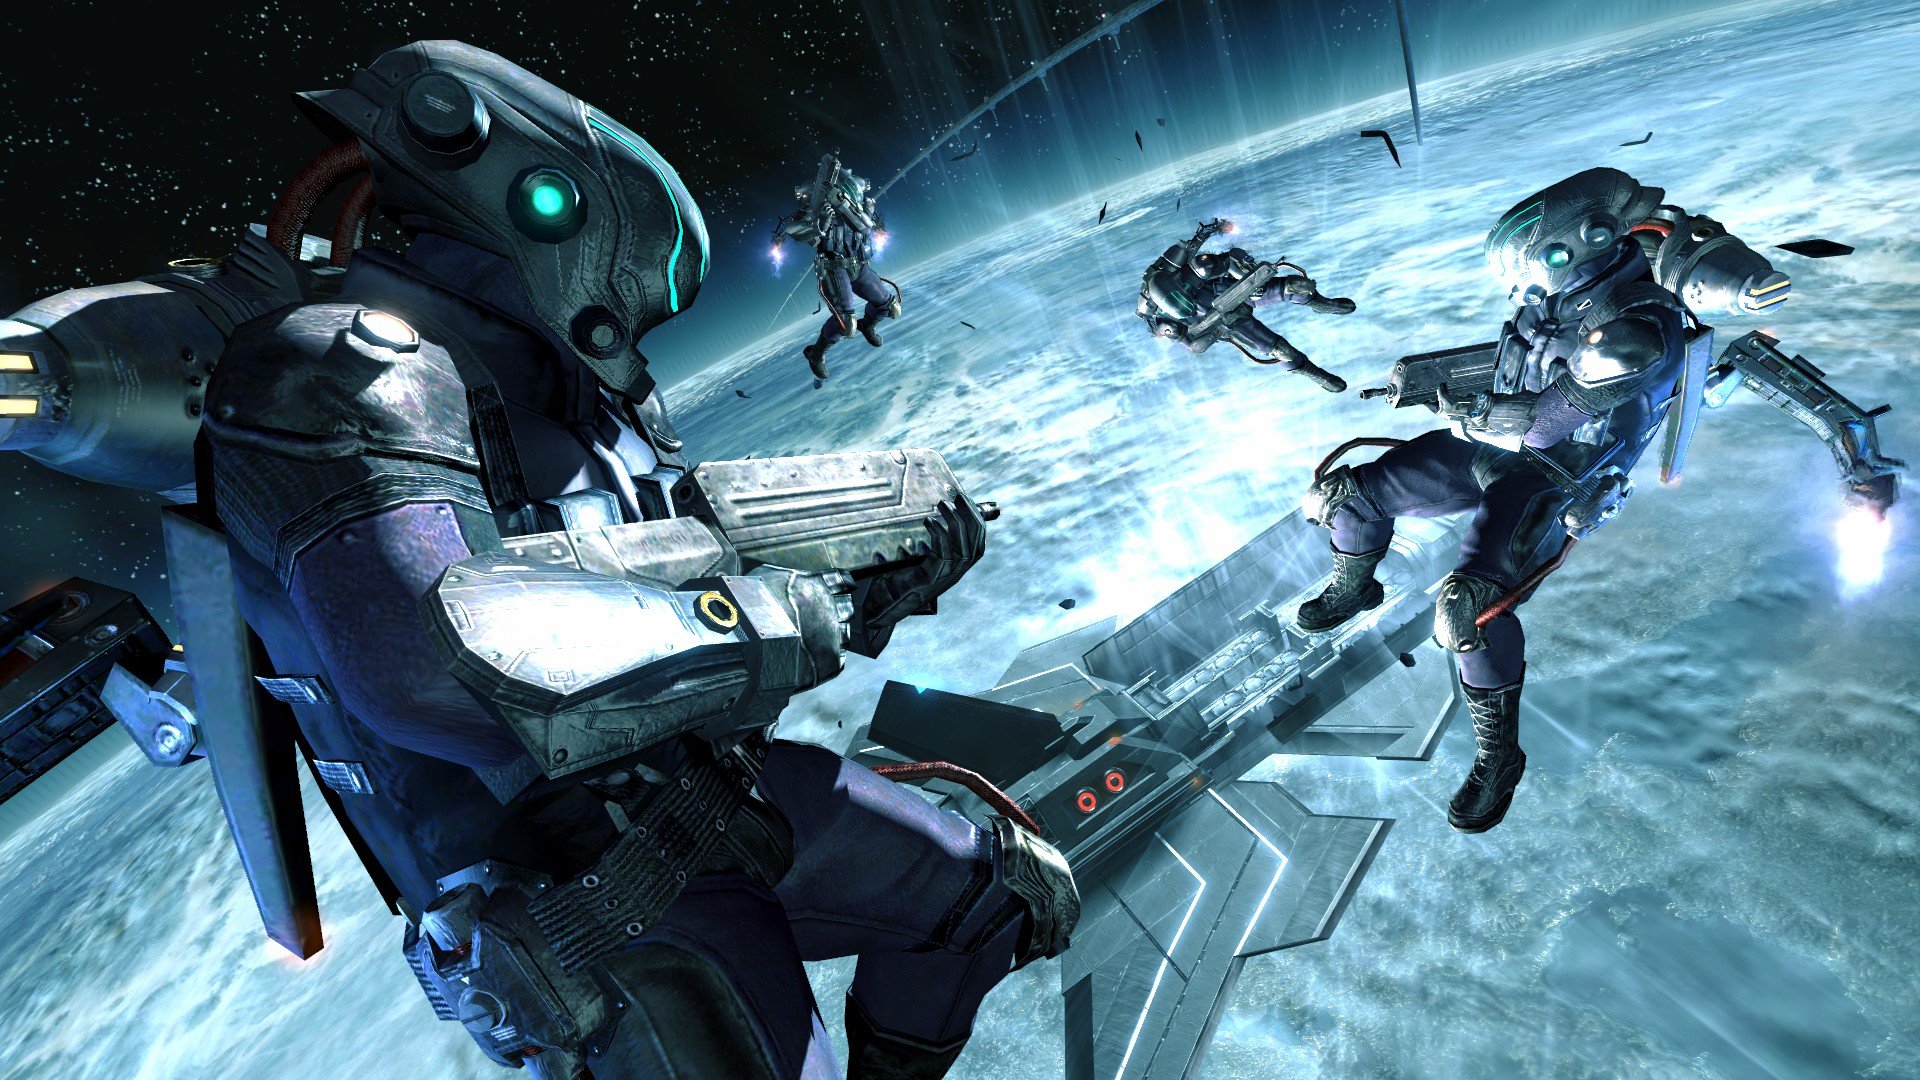 LOST PLANET sci fi action warrior lost planet armor 20 wallpaper